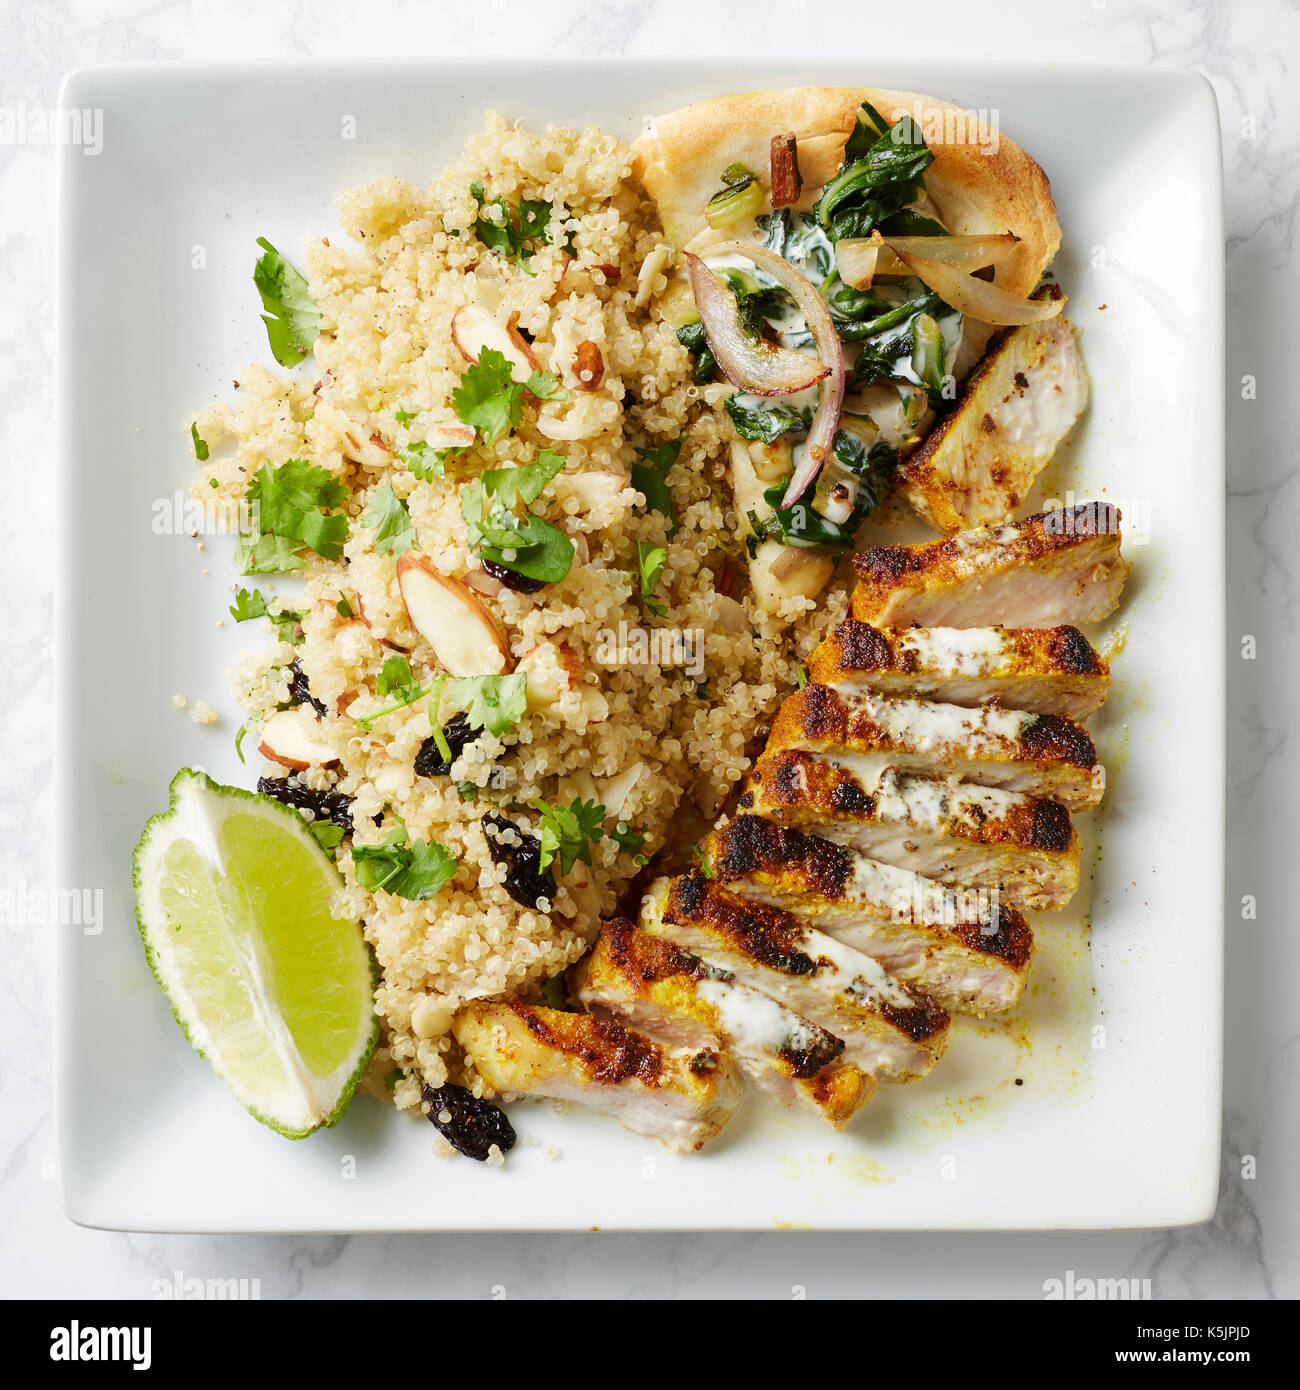 Grilled pork or chicken, quinoa and flatbread meal with fresh lime on a square white plate Stock Photo